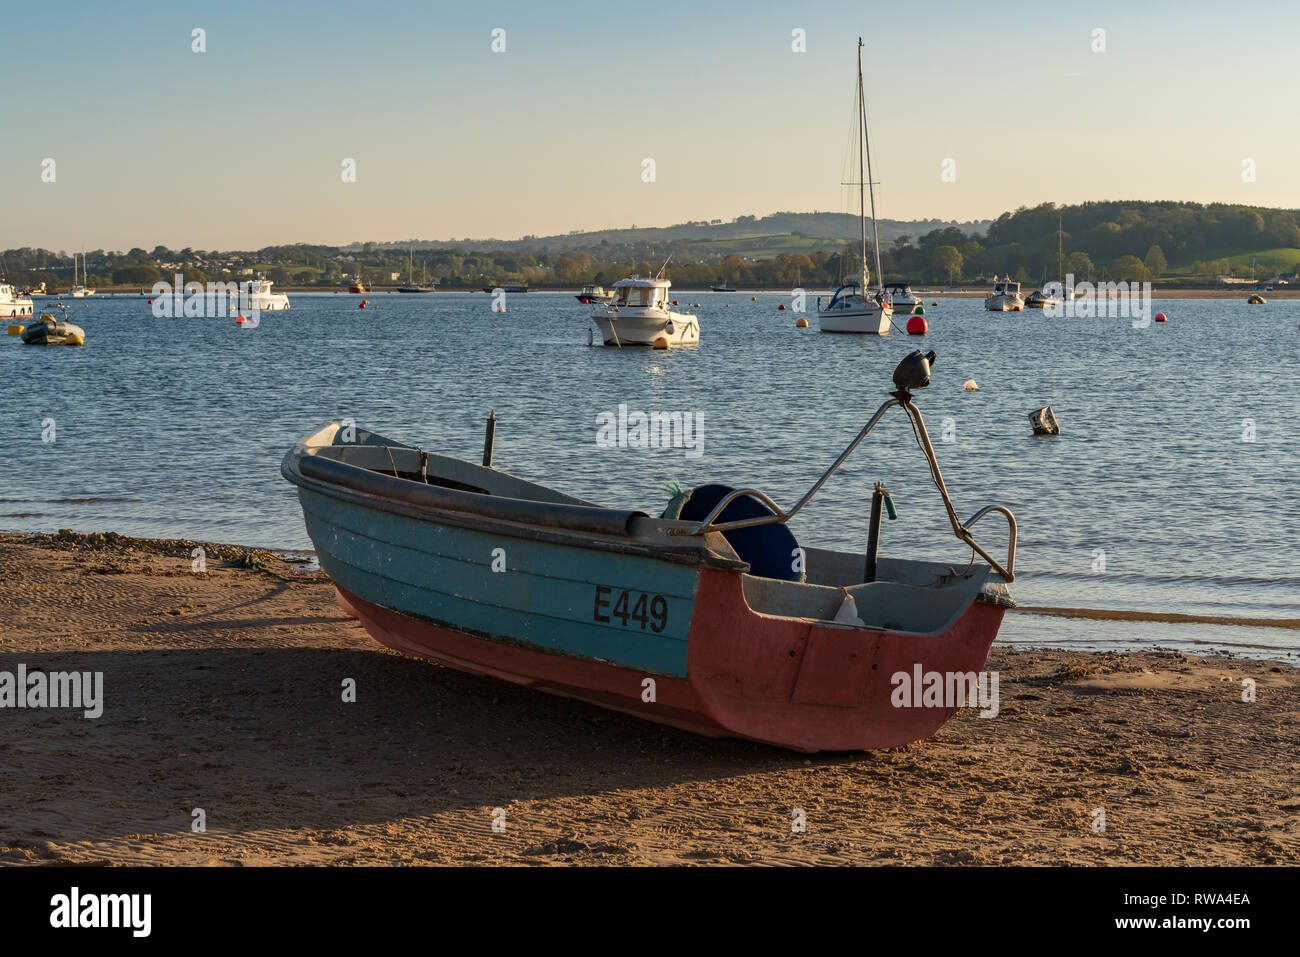 Emouth, Devon, England, UK - April 18, 2017: A Boat on the shore of the River Exe with other boats floating in the river in the background Stock Photo